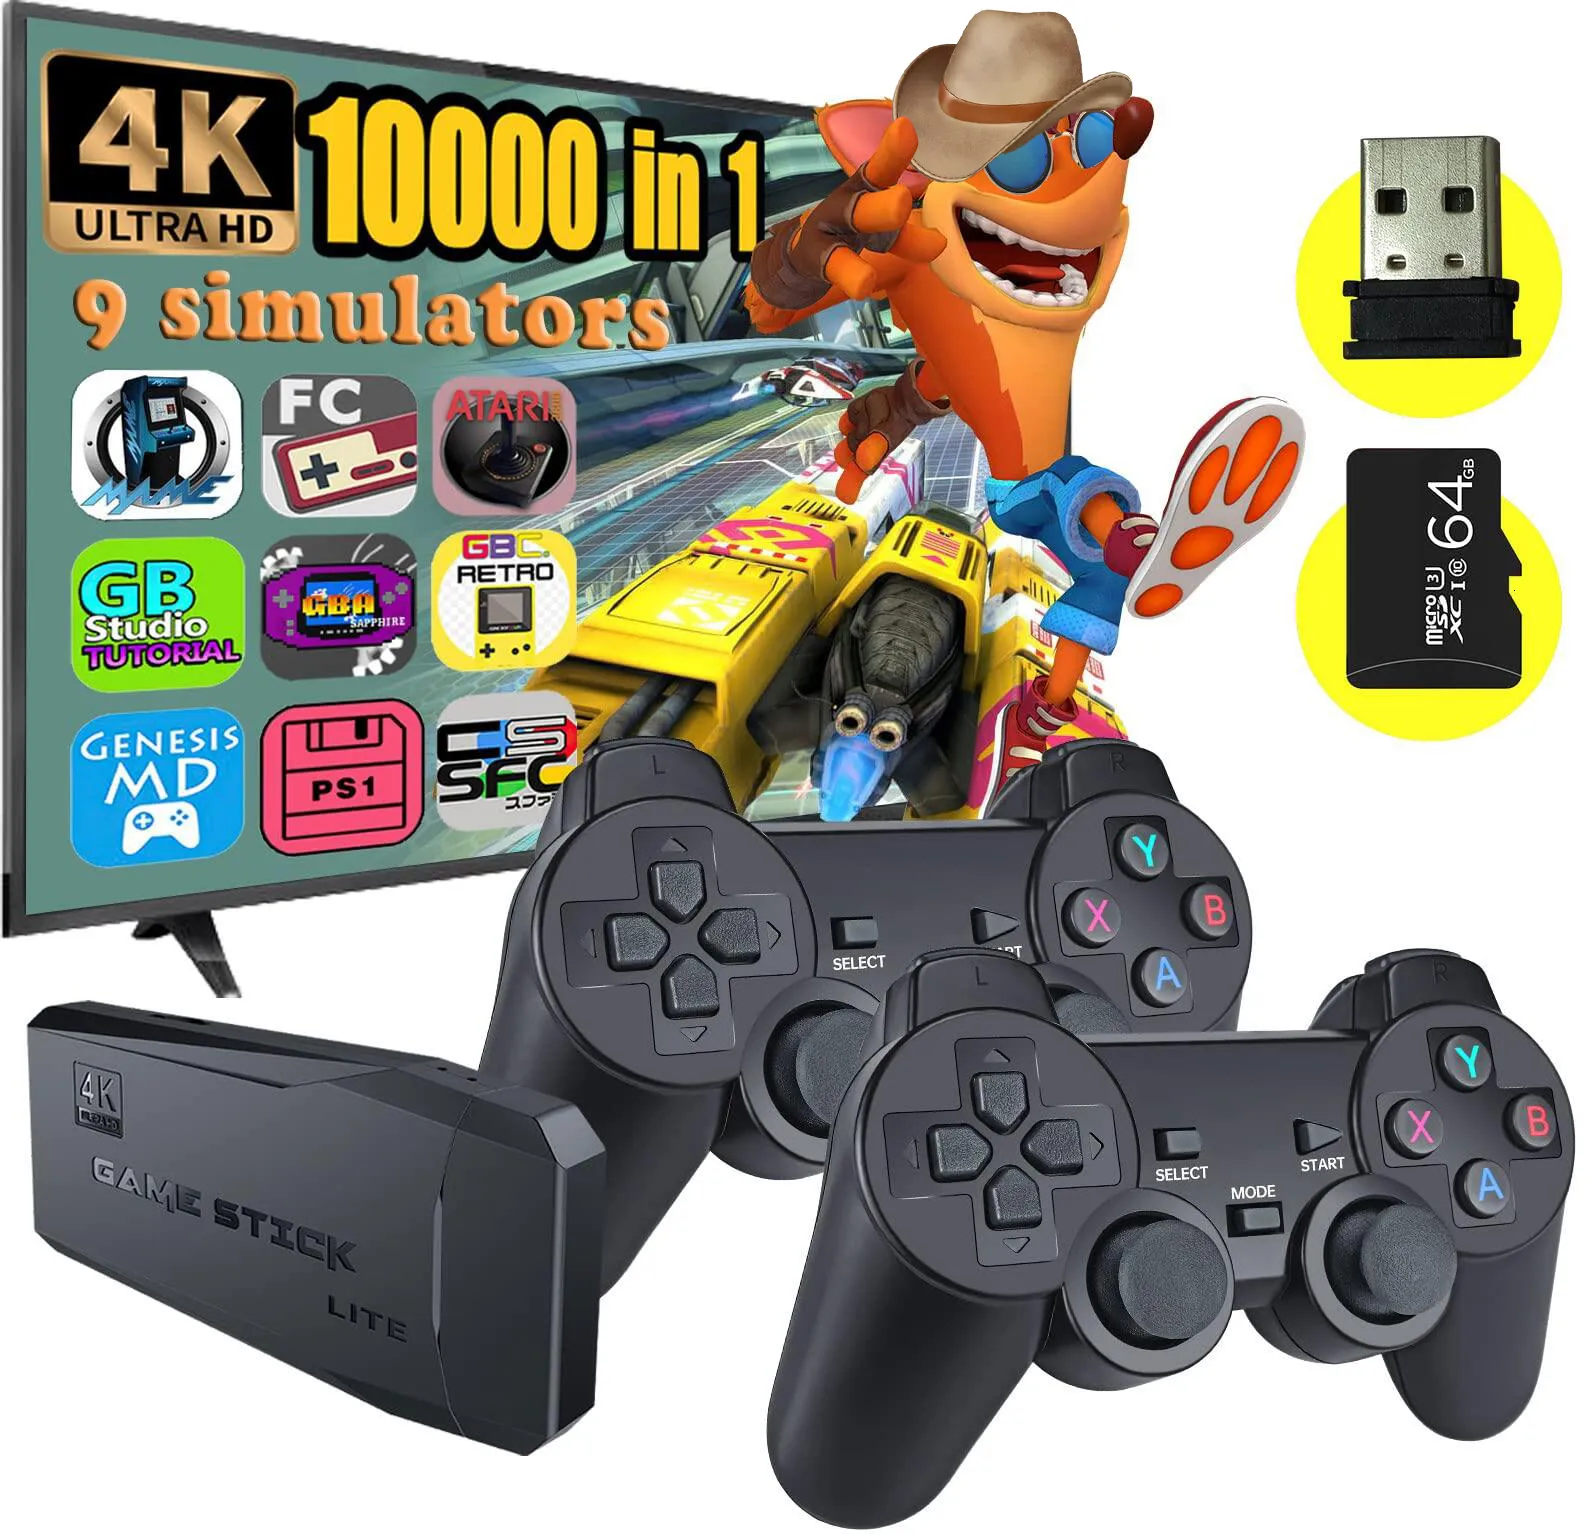 Game Controllers Joysticks 64G Game Stick Lite 4K Built-In 10000 Game Retro Game Console For PS1 GBA Wireless Controller for Gba KID Xmas Gift Drop 230718